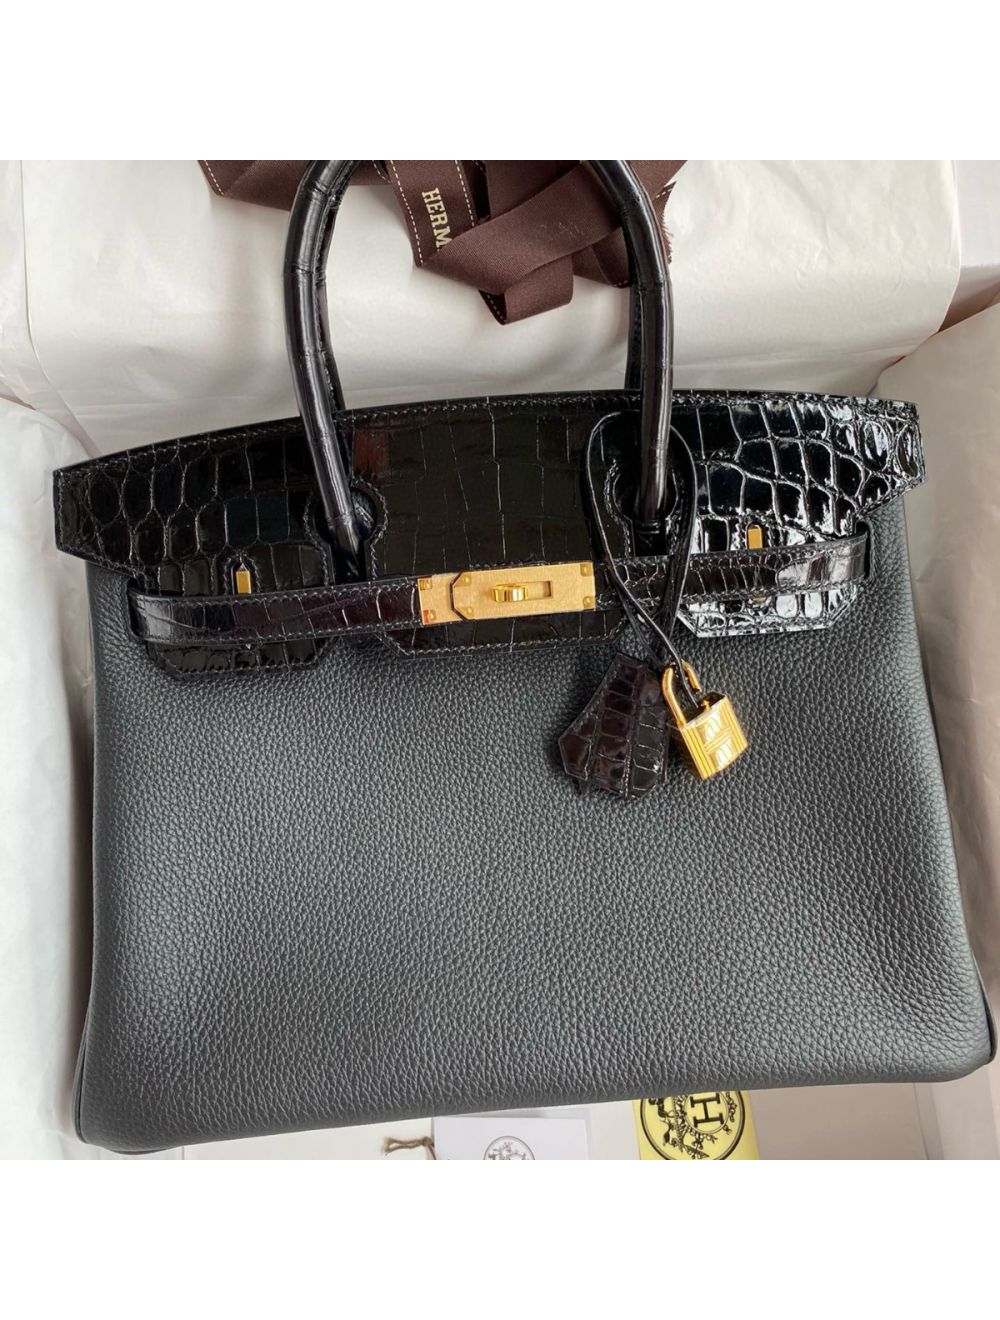 Replica Hermes Touch Birkin 30 Bag In Black Clemence and Shiny